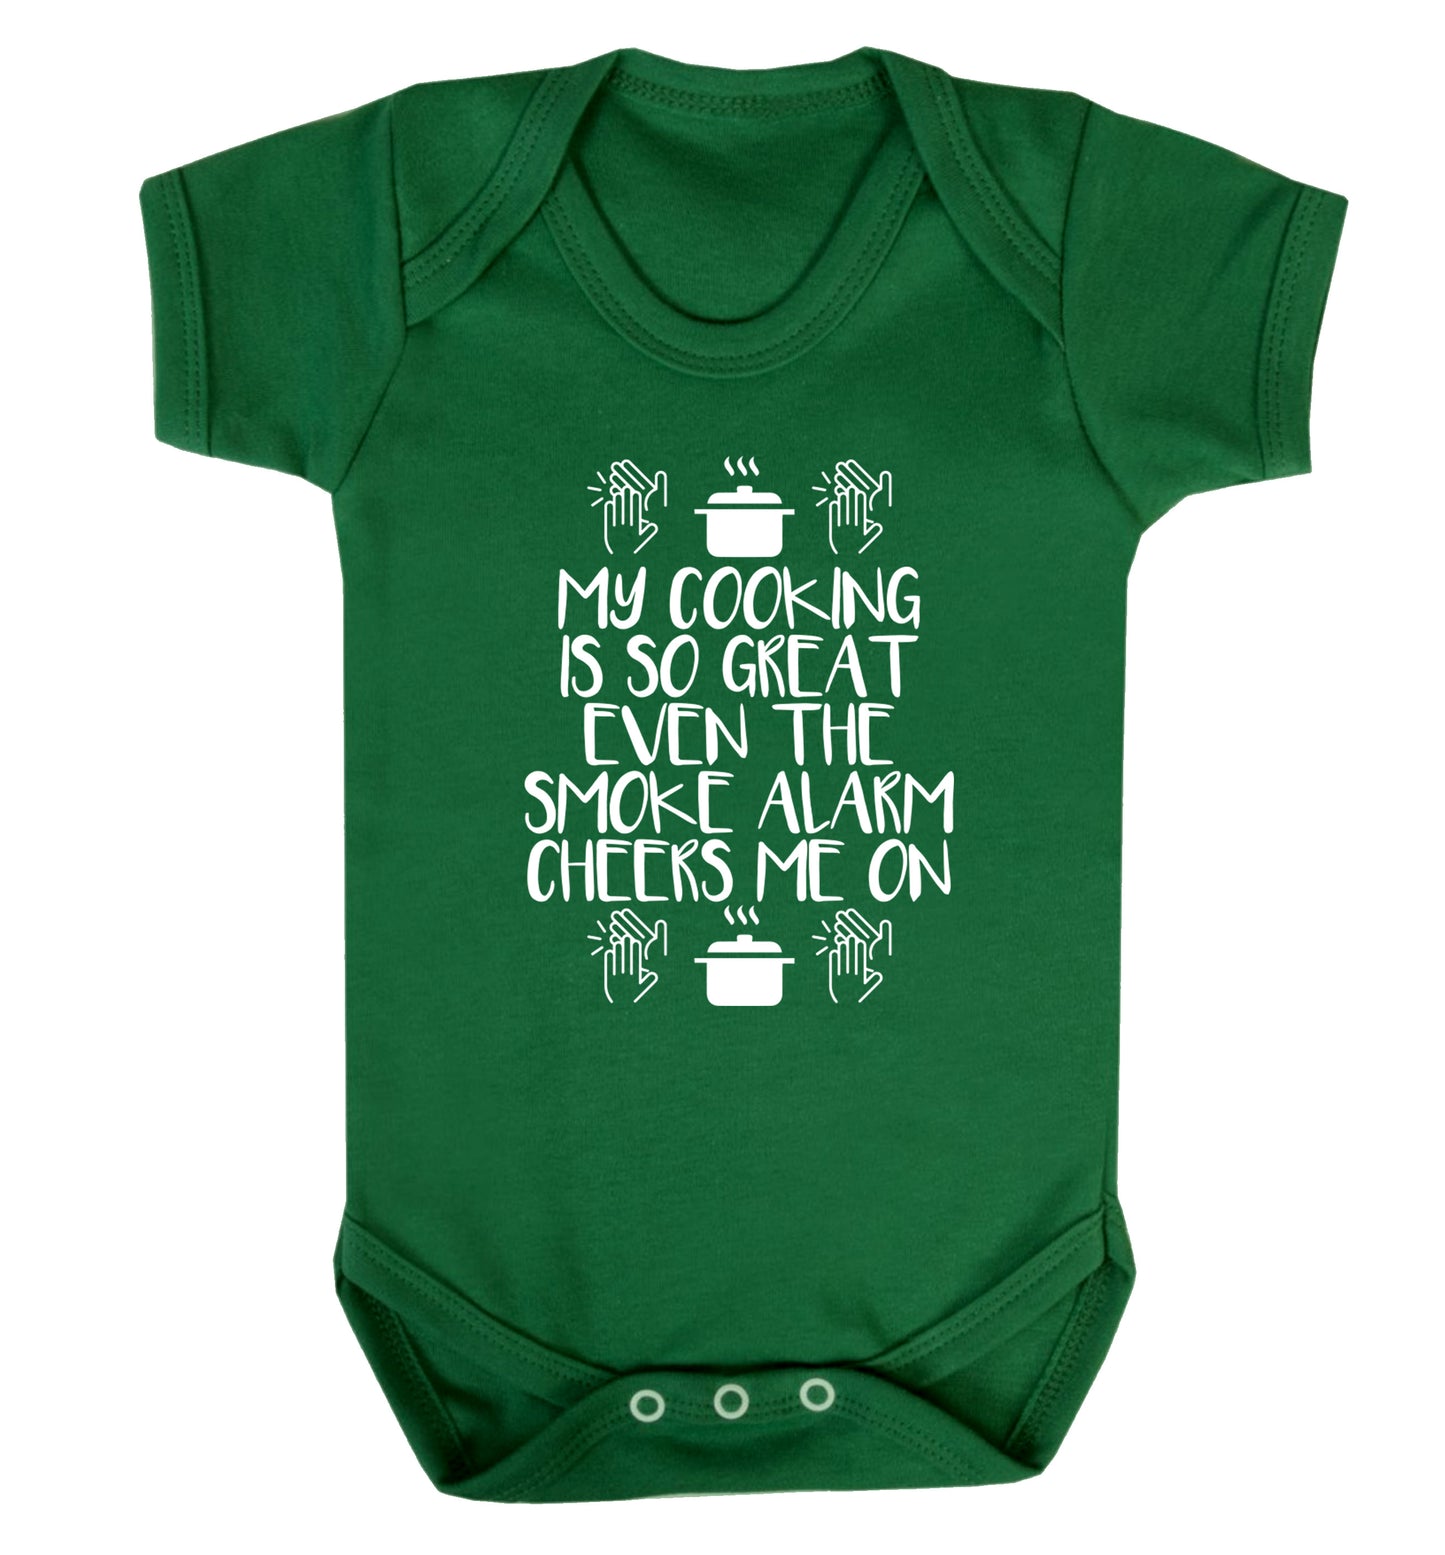 My cooking is so great even the smoke alarm cheers me on! Baby Vest green 18-24 months